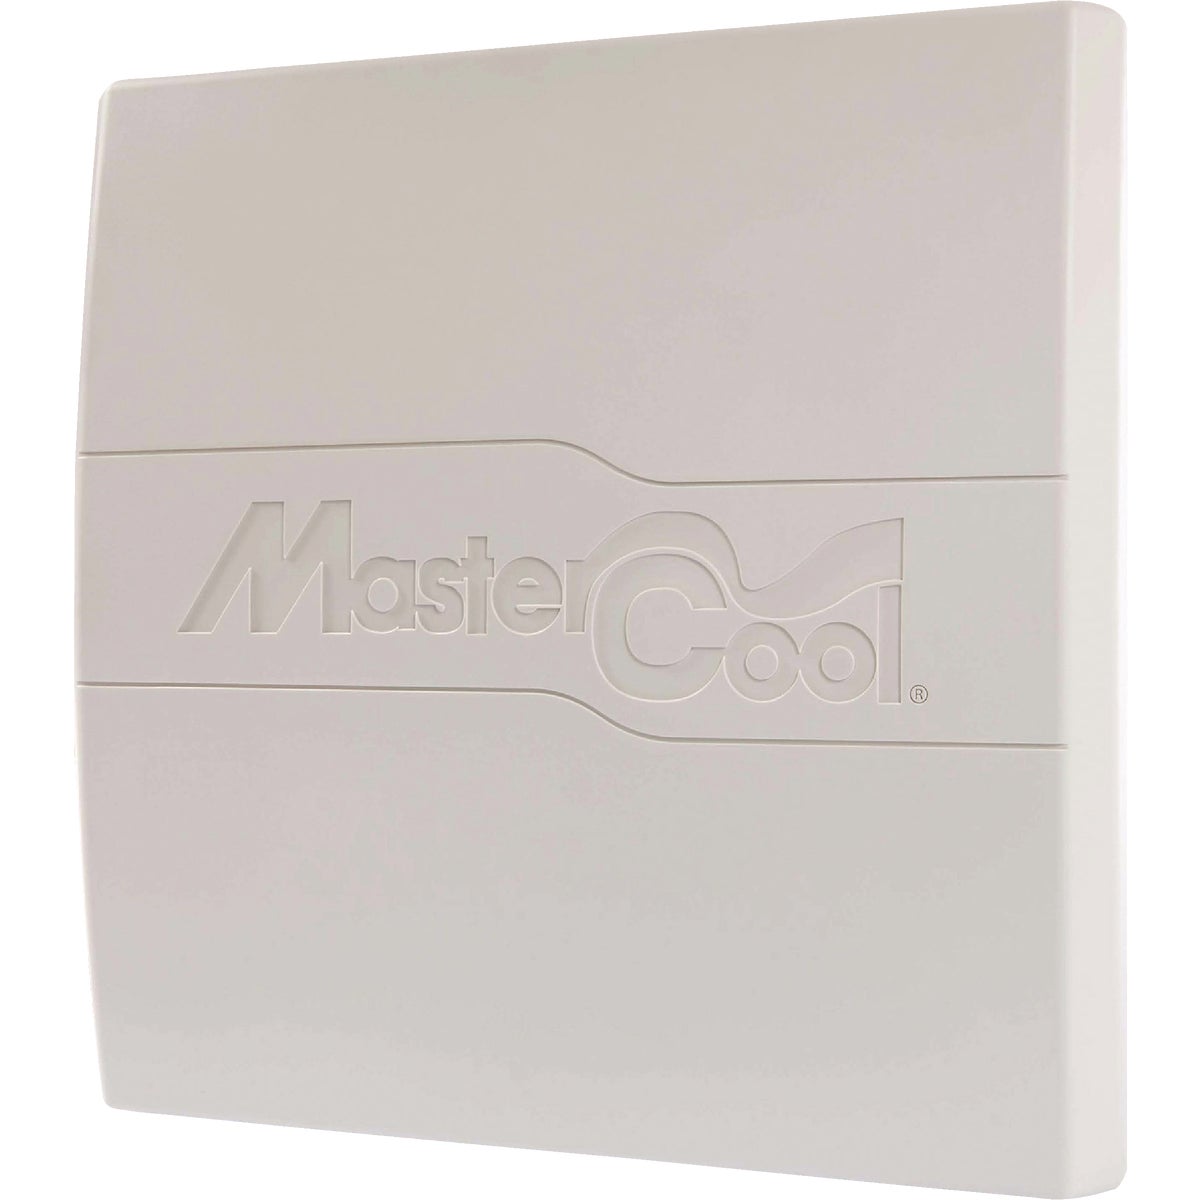 Item 403243, MasterCool interior cooler grill cover made of durable high impact 